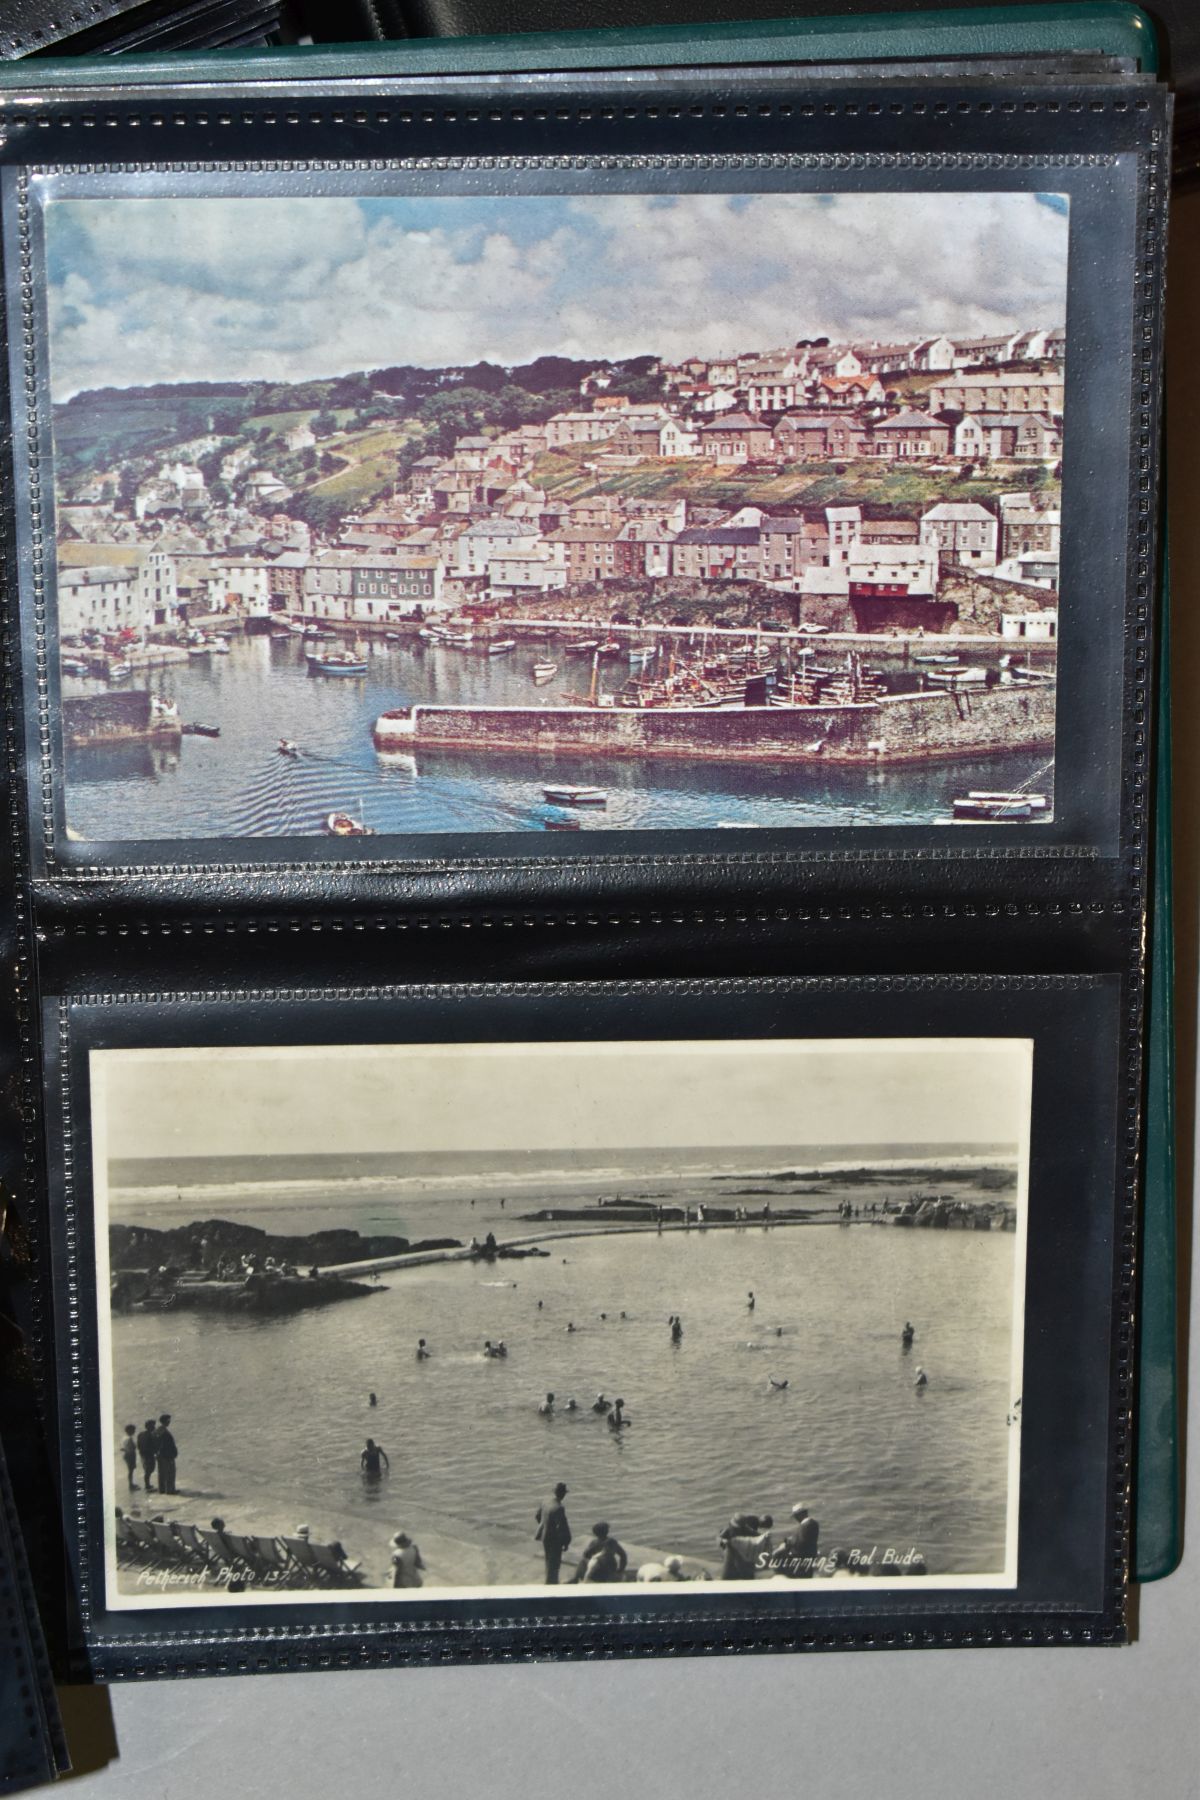 POSTCARDS, CORNWALL, approximately four hundred and forty postcards of Cornwall (Penzance, Fowey, St - Image 11 of 17